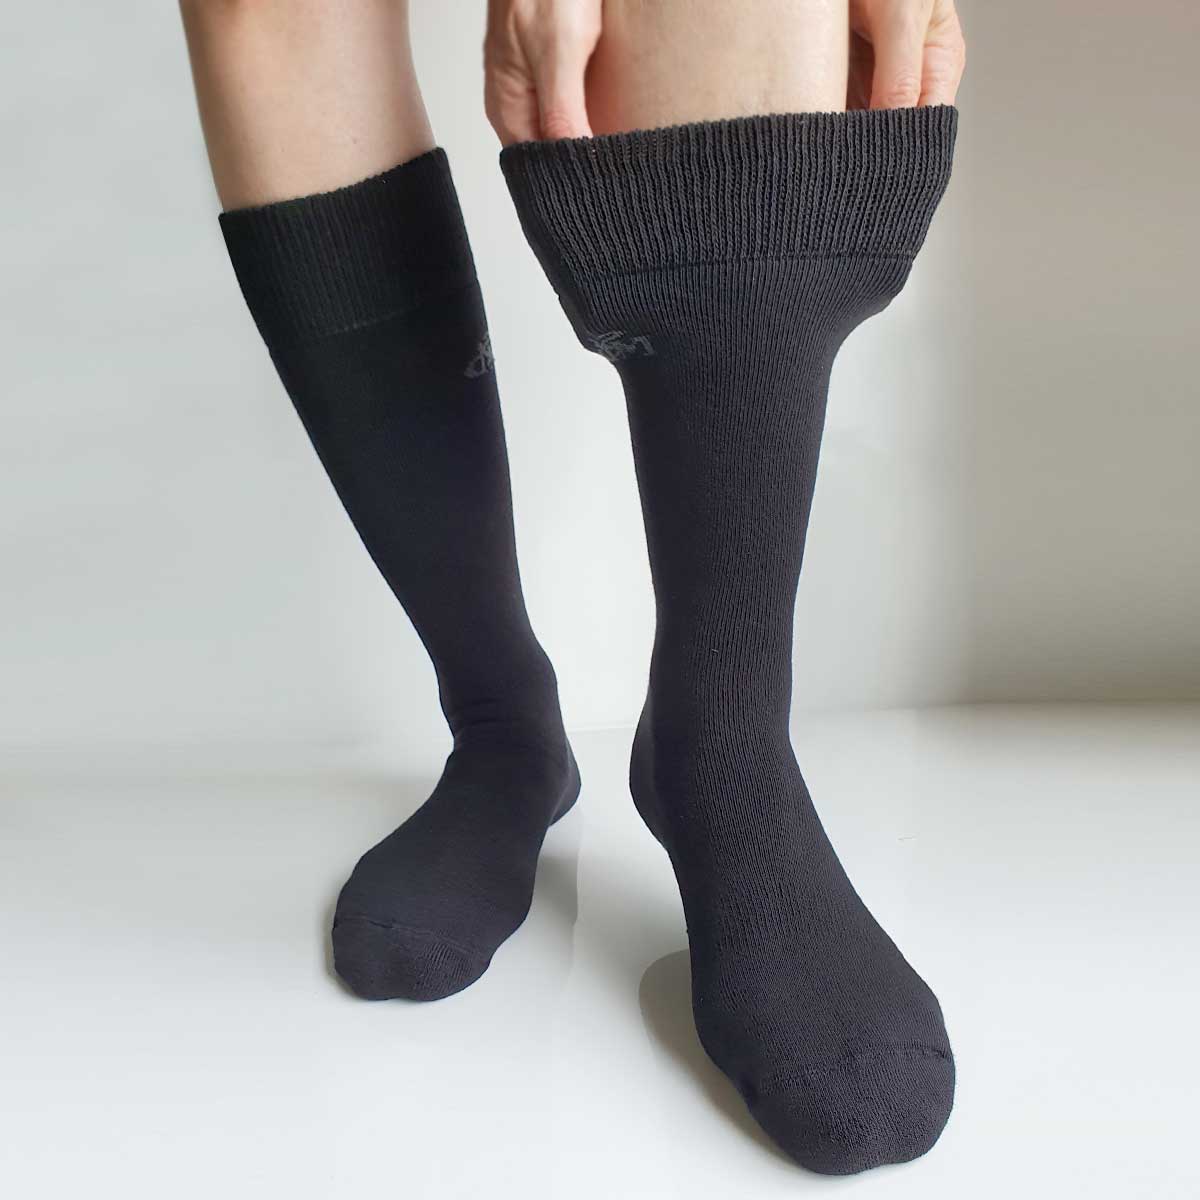 Medic Deo diabetic knee socks in cotton with soft terry - socks that do not tighten